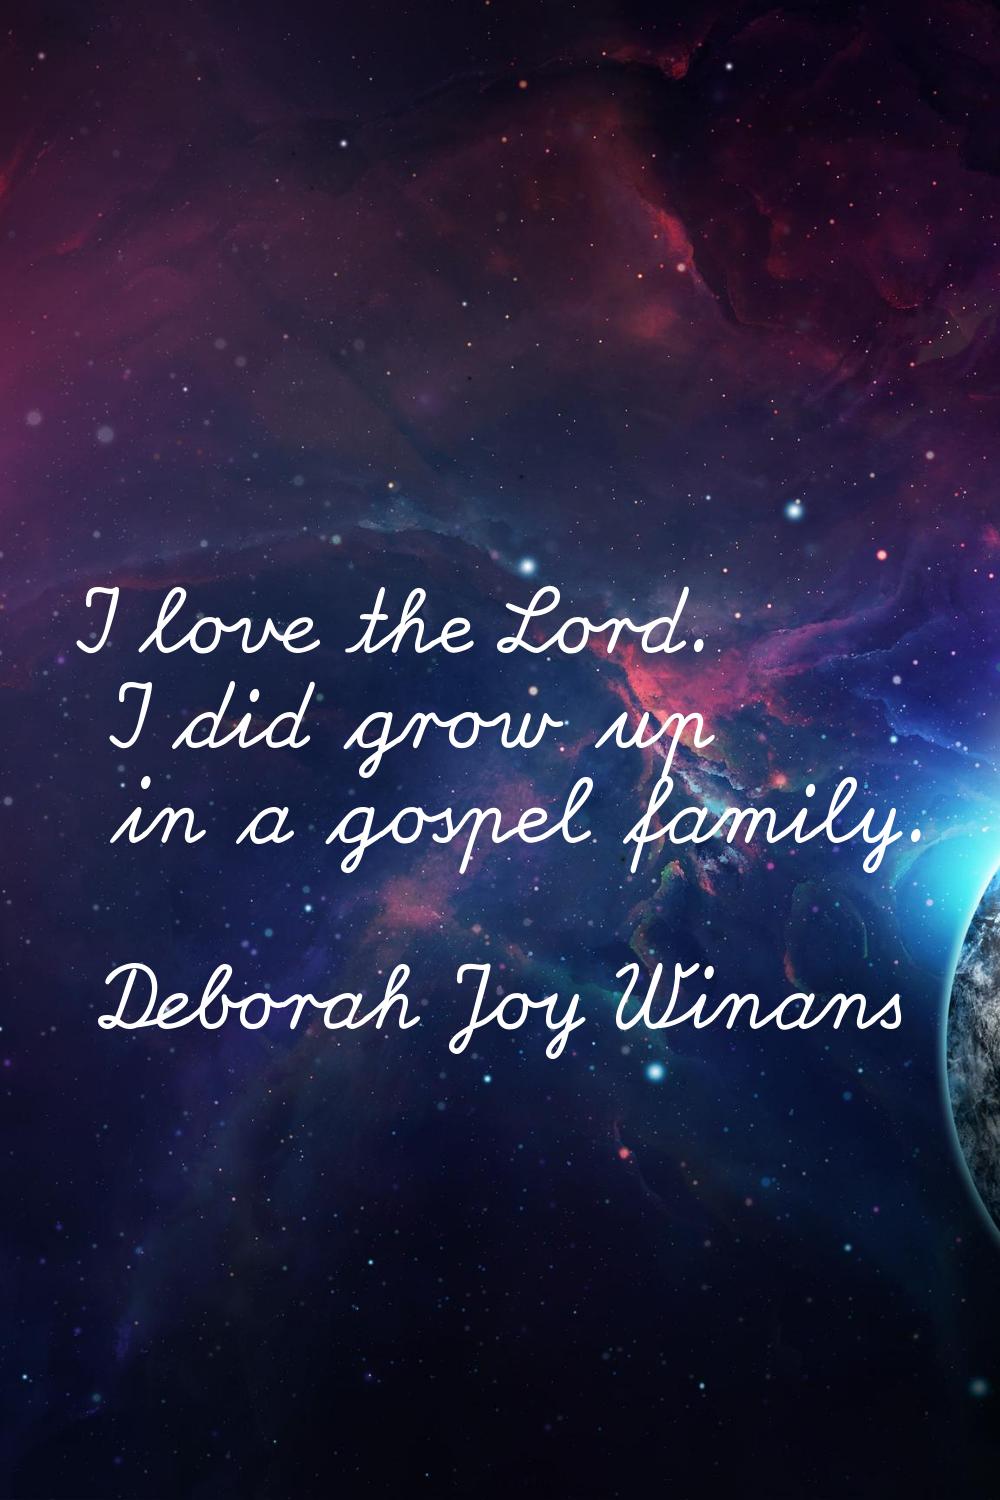 I love the Lord. I did grow up in a gospel family.